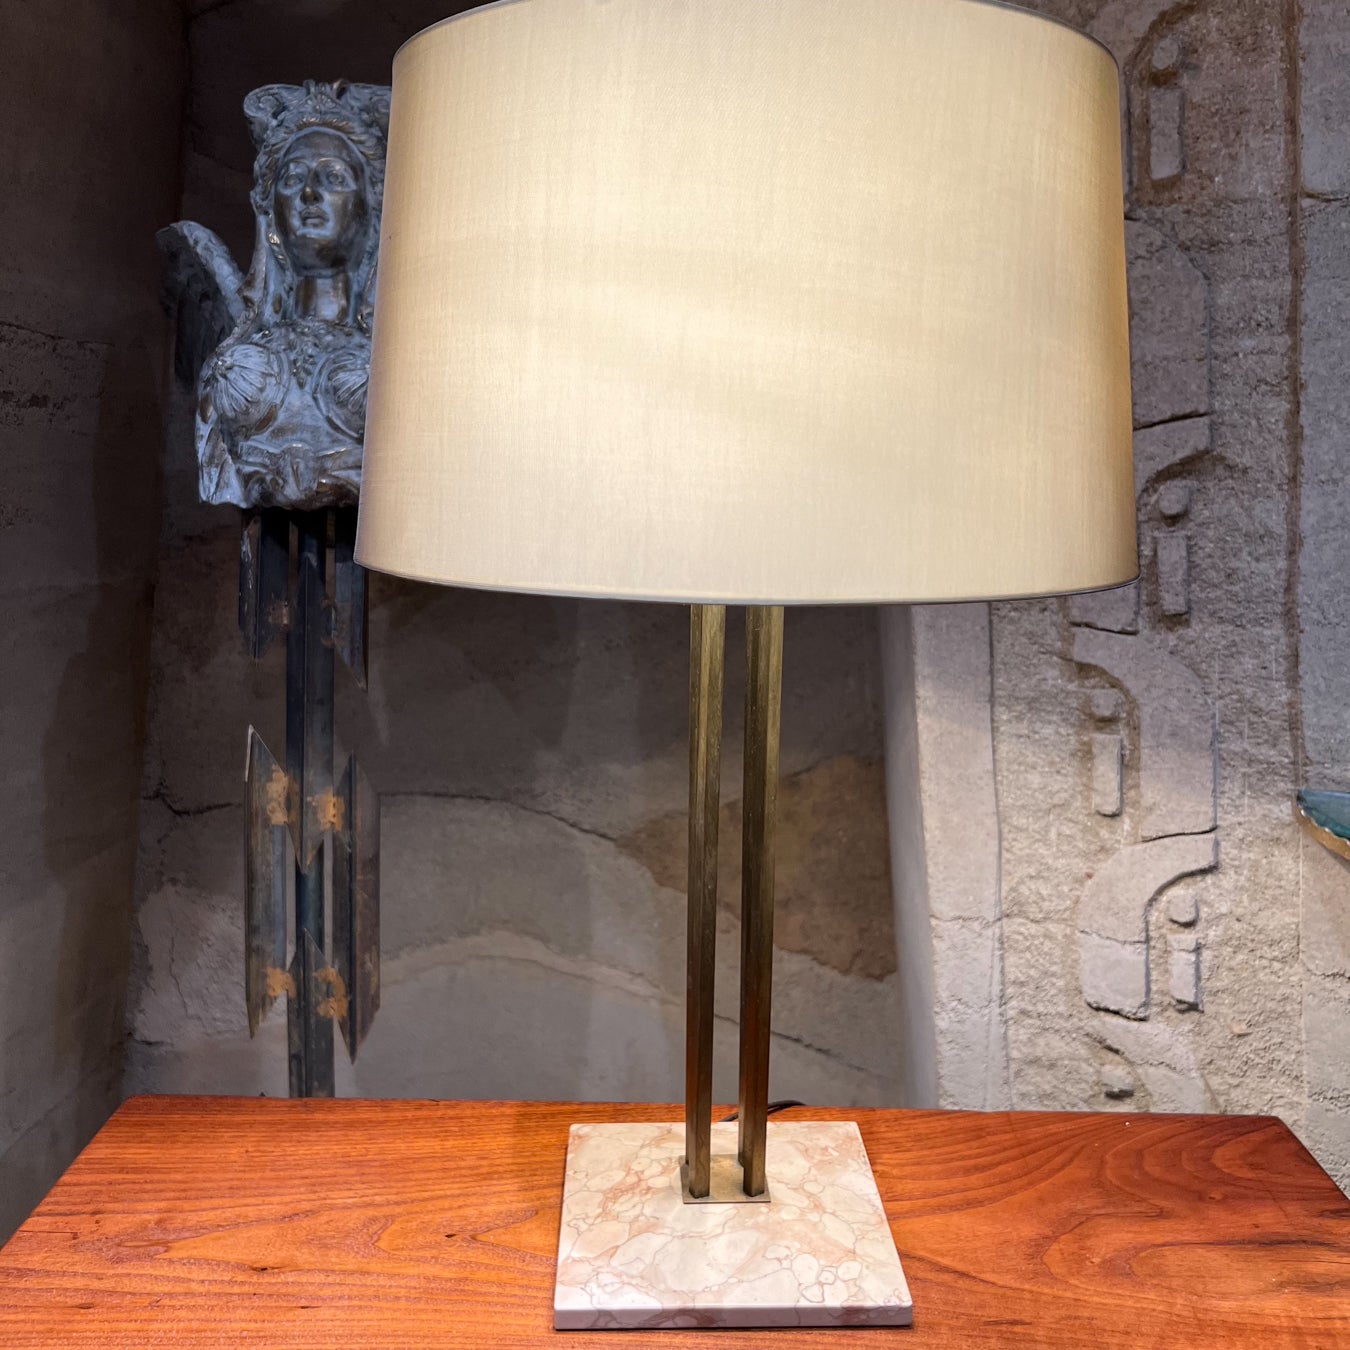 1950s Elegant Table Lamp designed by Gerald Thurston and produced by Lightolier
Lamp is supported by a colorful, faceted marble base. Three-way light socket.
27 tall to finial x 7.5 x 7.5
Preowned original vintage condition. No shade is